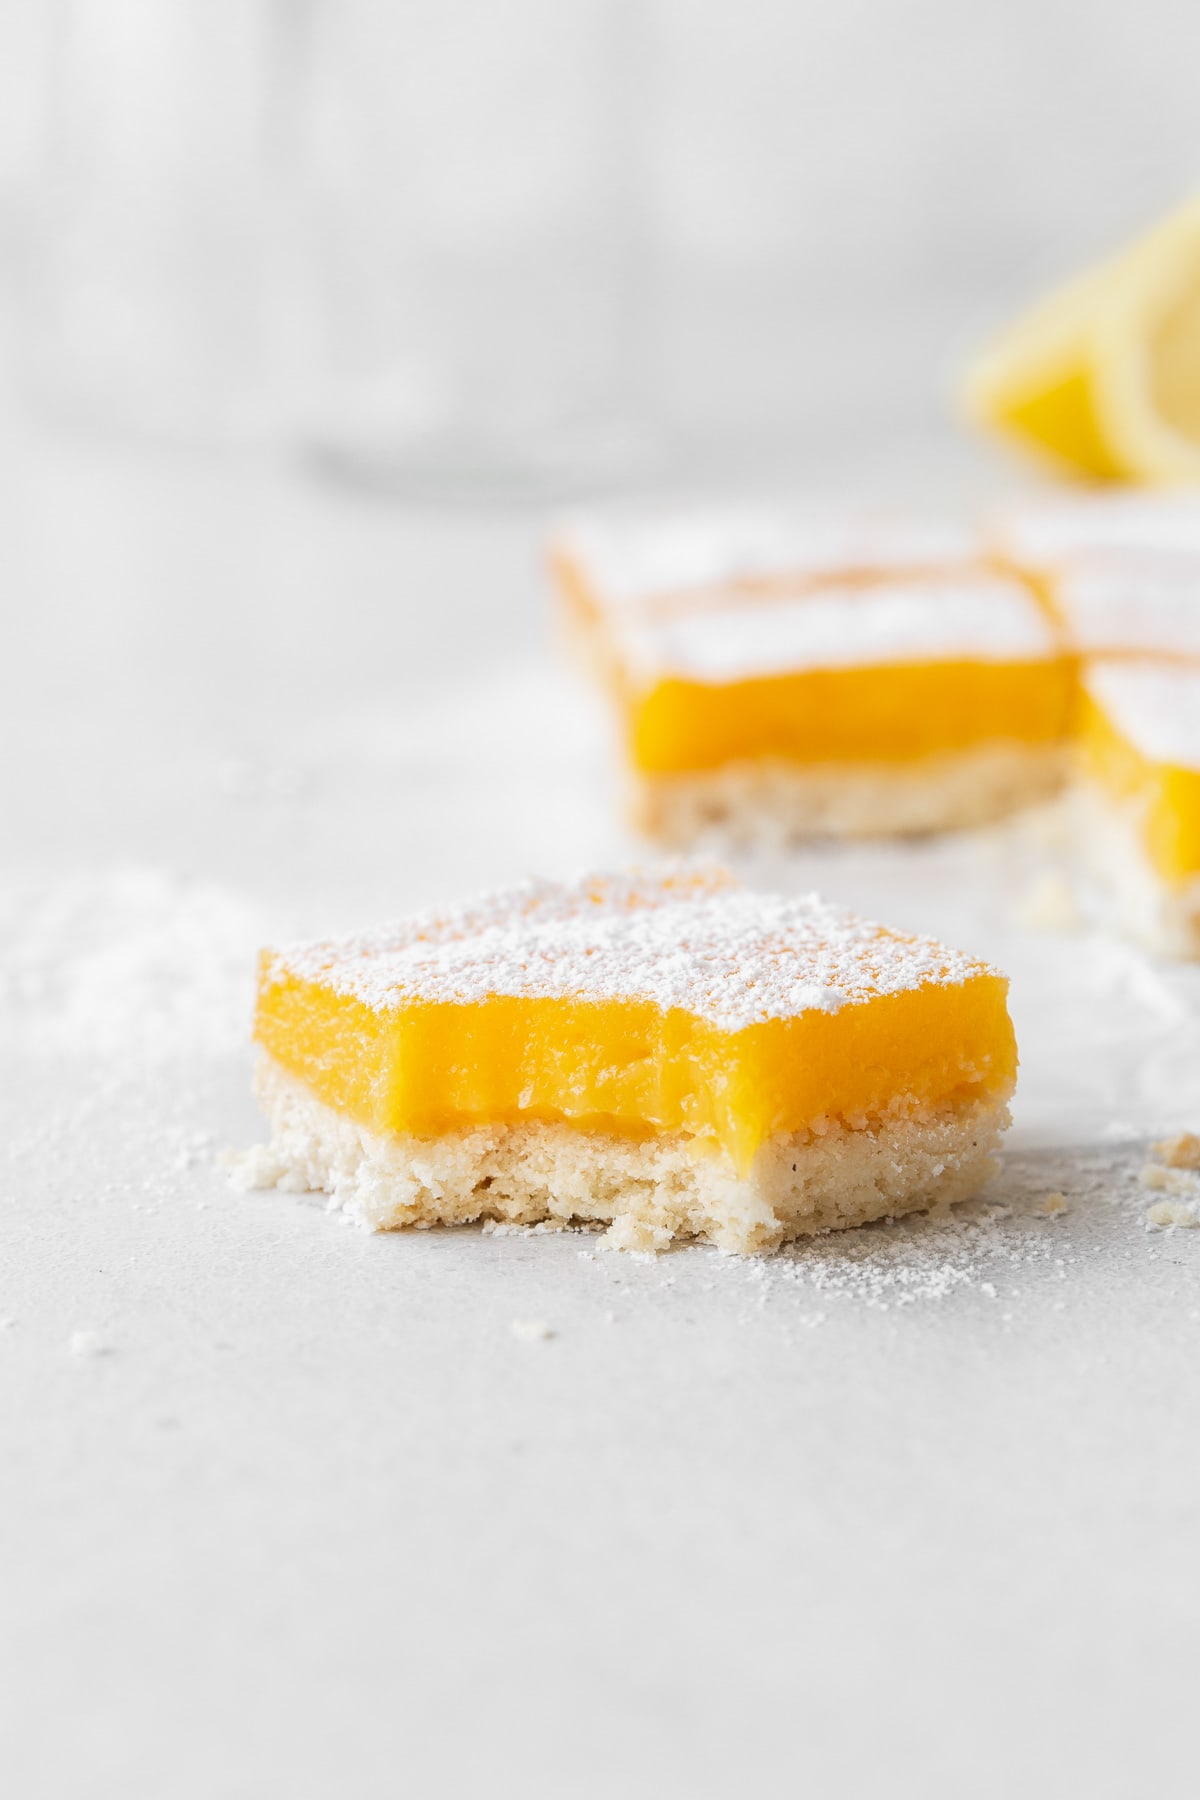 A side shot of a dairy-free lemon bar with a bite taken out of it.